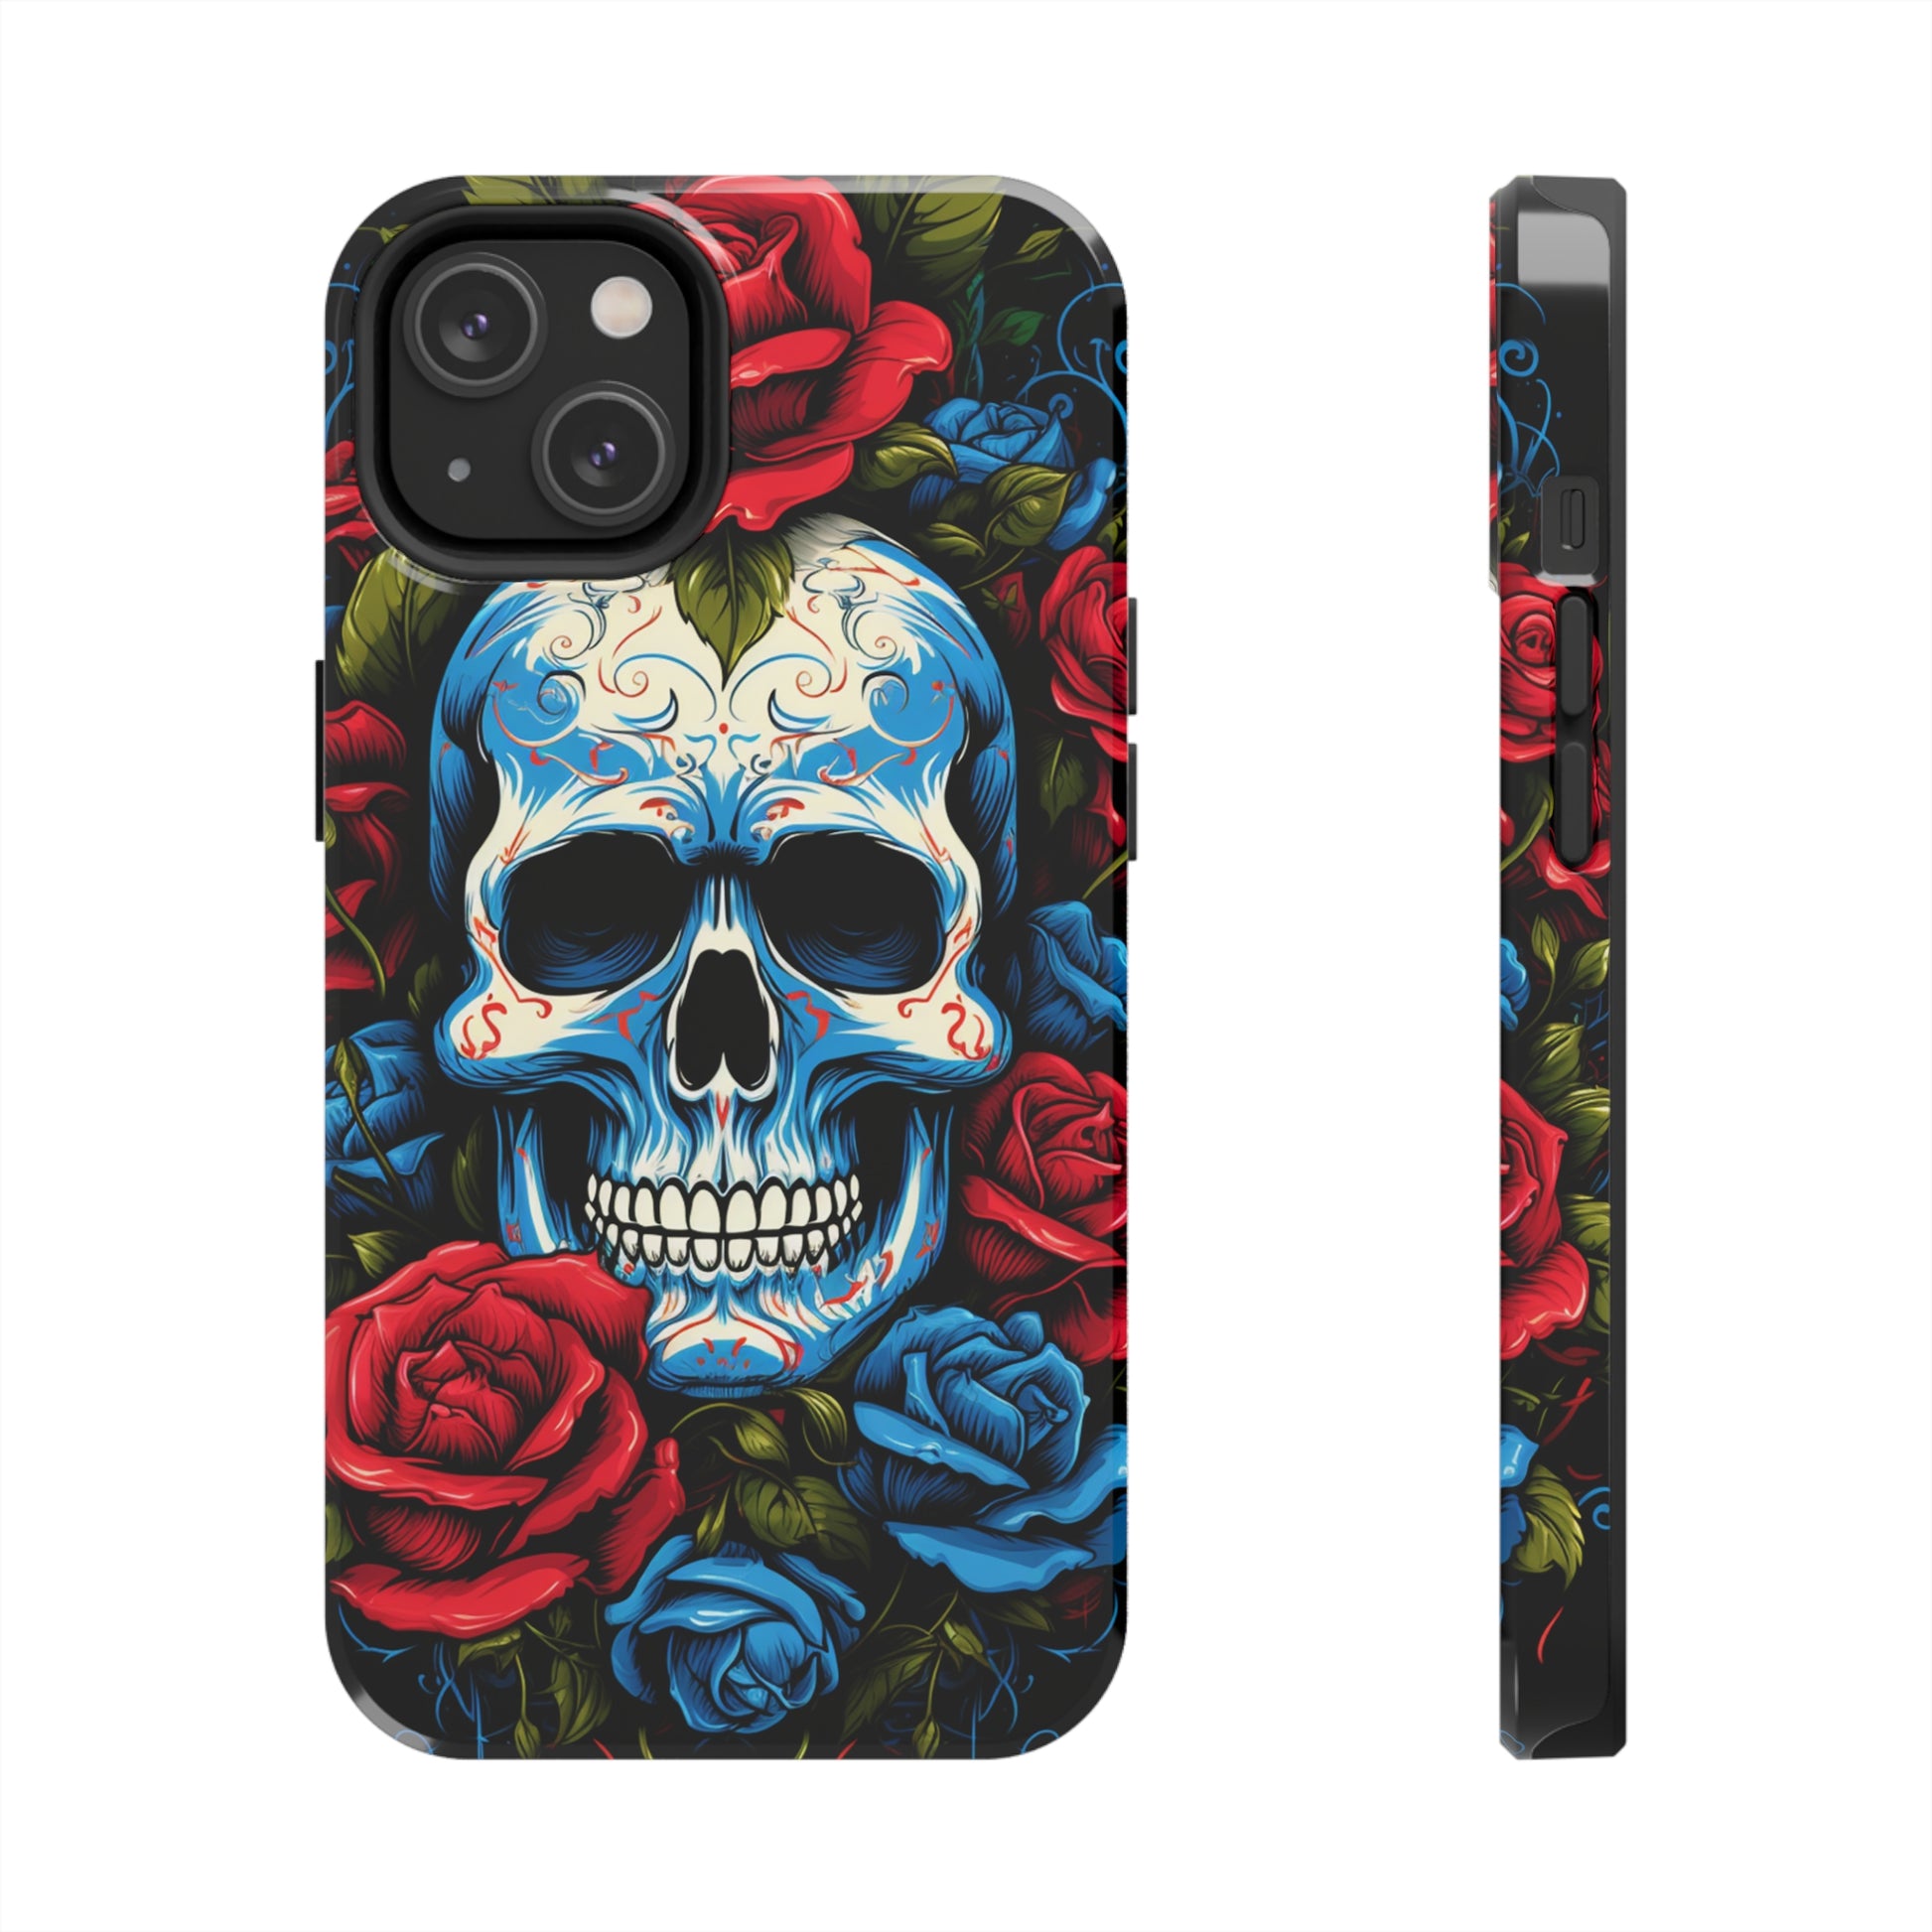 Protective iPhone 12 Pro Max case with detailed rose artwork